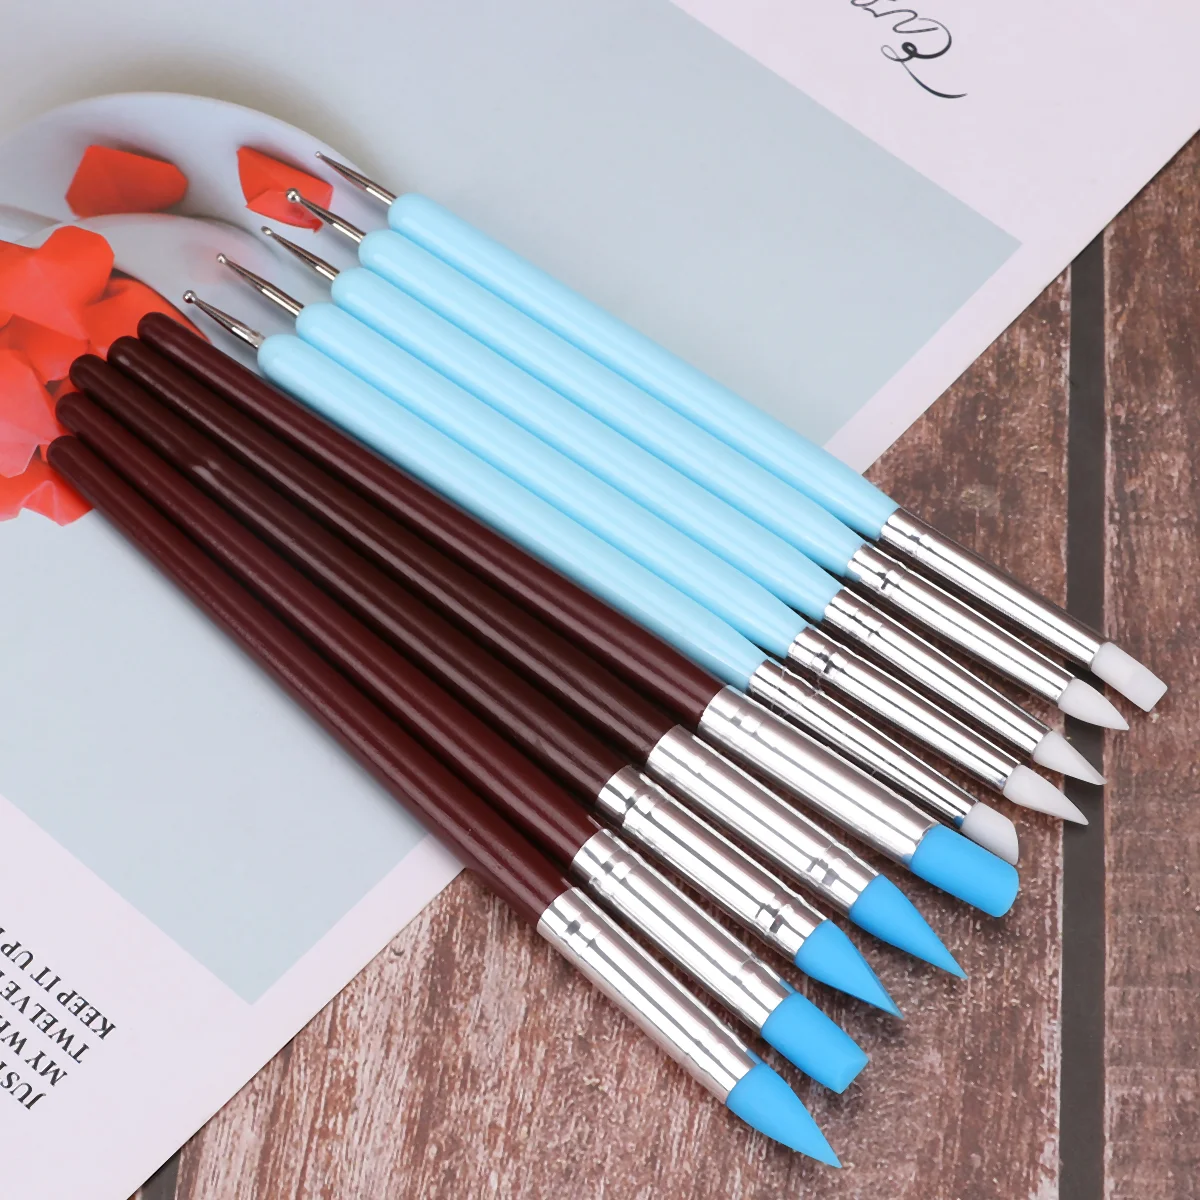 

10PCS Silicone Clay Sculpting Tools, Polymer Modeling Clay Dotting Tool Set for Pottery Sculpture, Nail, DIY Handicraft